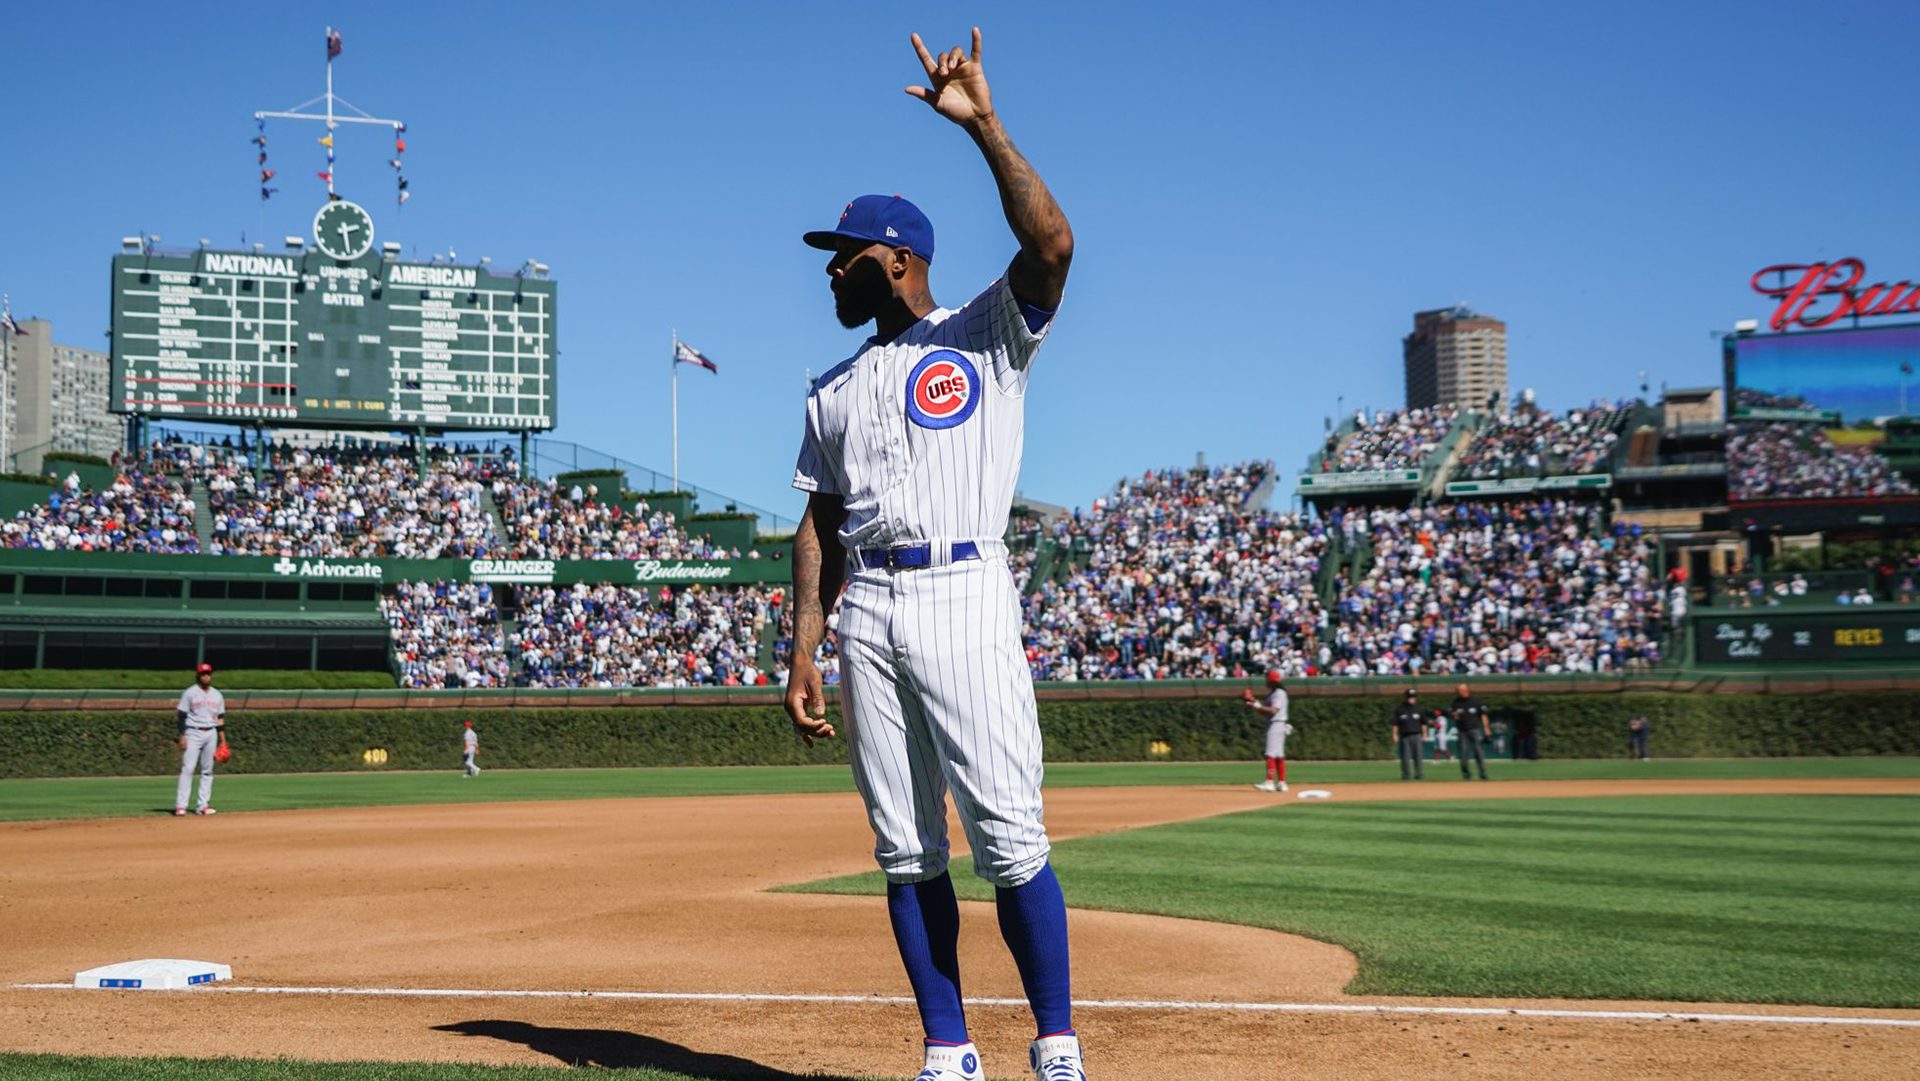 Cubs players, staff explain what made Jason Heyward so special inside ...